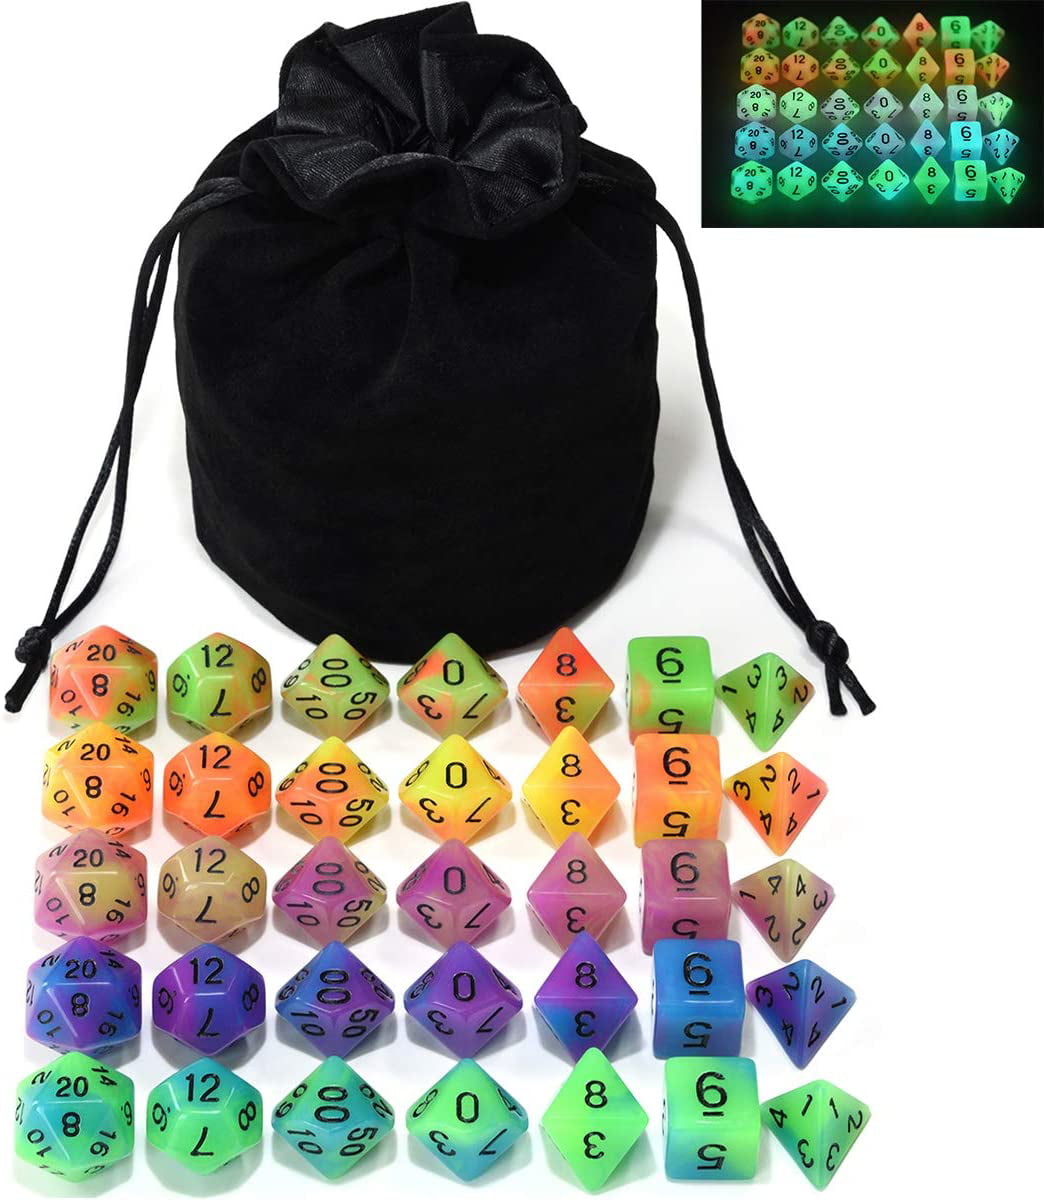 NEW 5" x 7" Red Velveteen Cloth Dice Bag RPG D&D Game Tokens Counter Pouch 